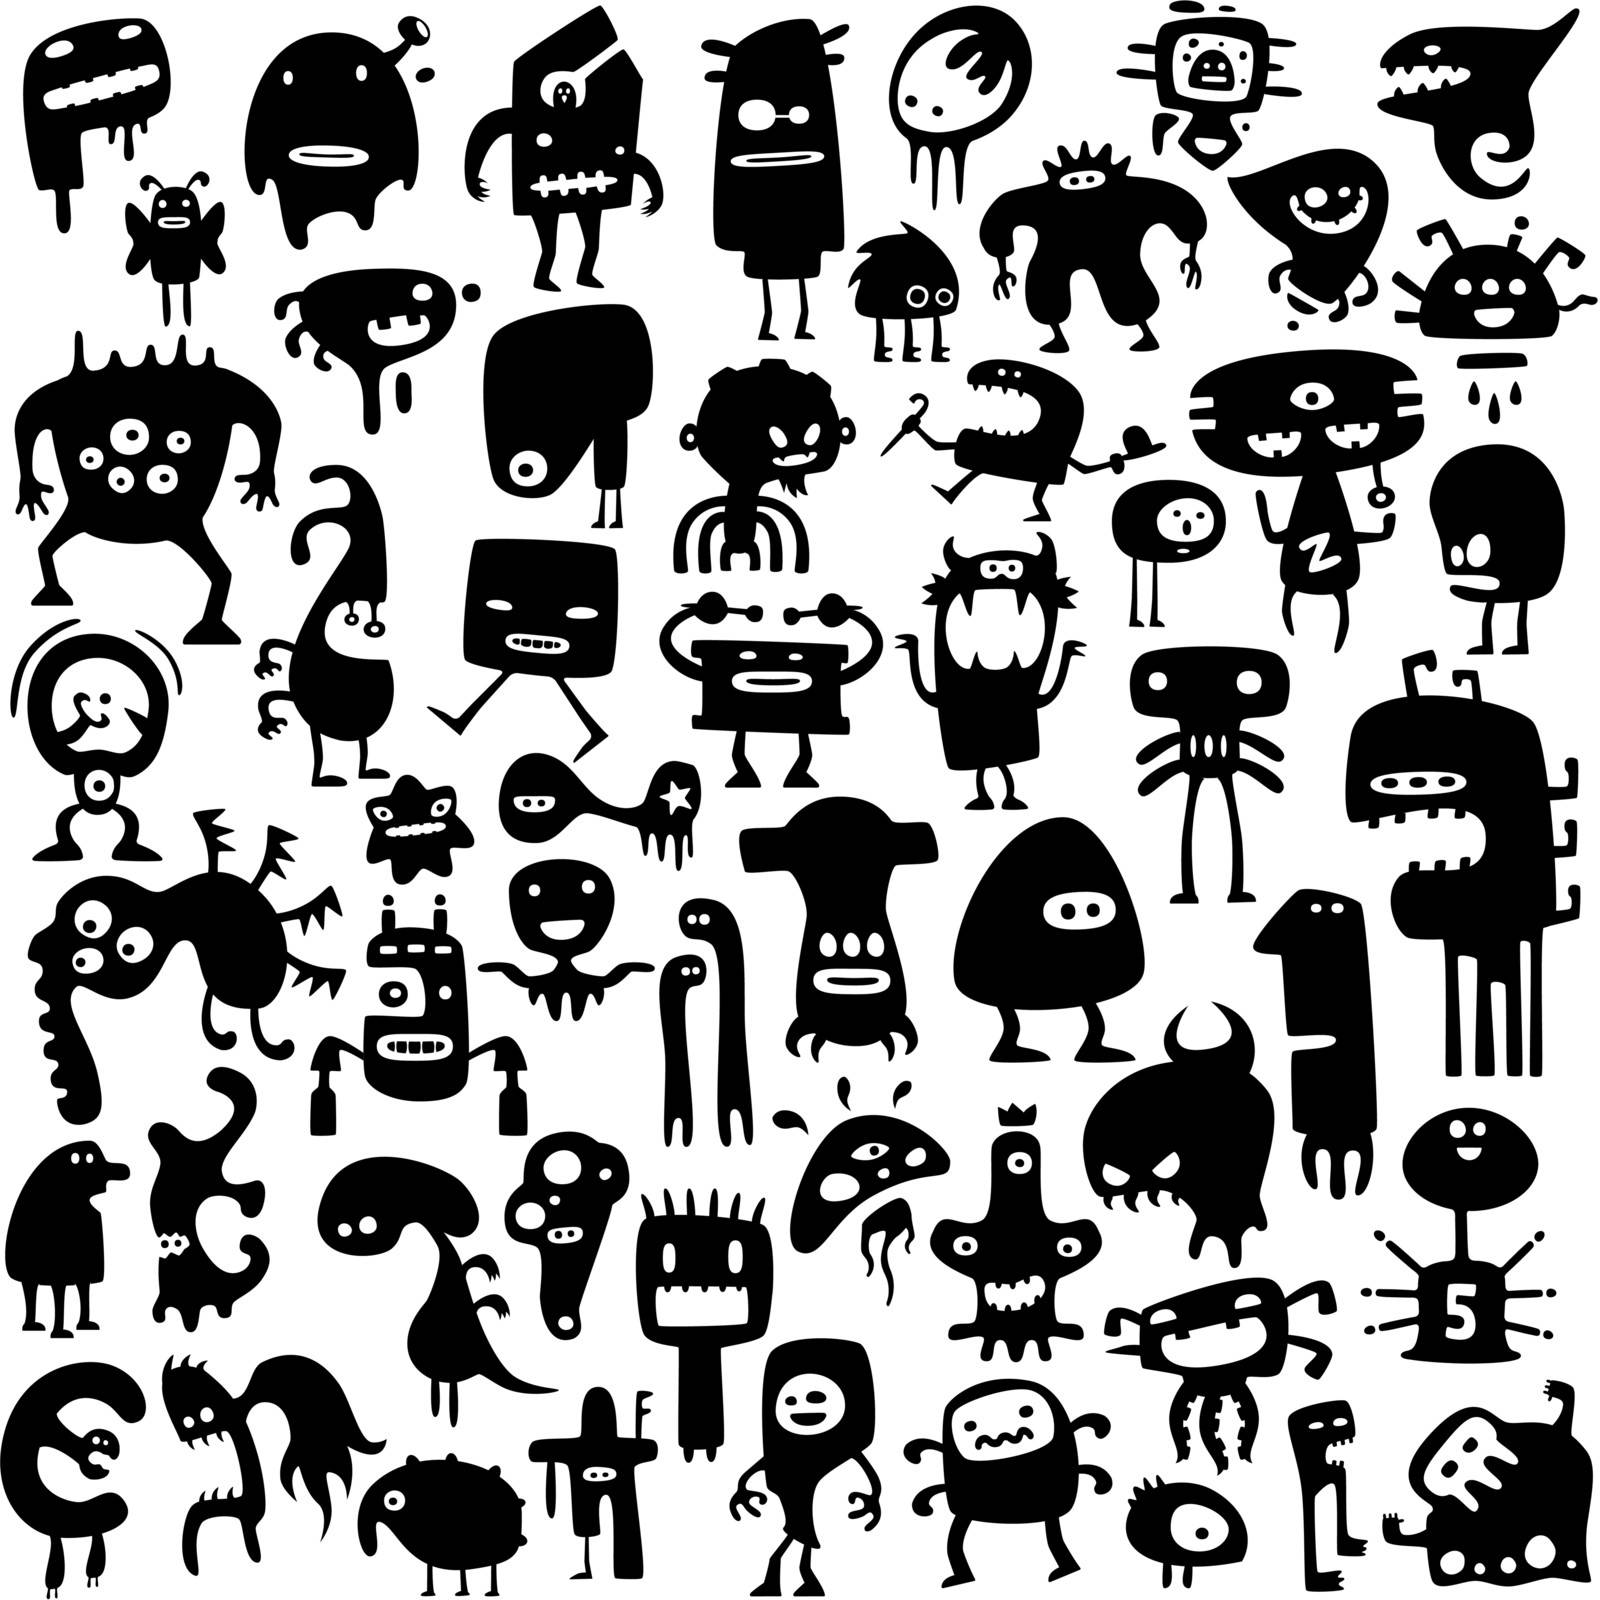 Big collection of cartoon funny monsters silhouettes